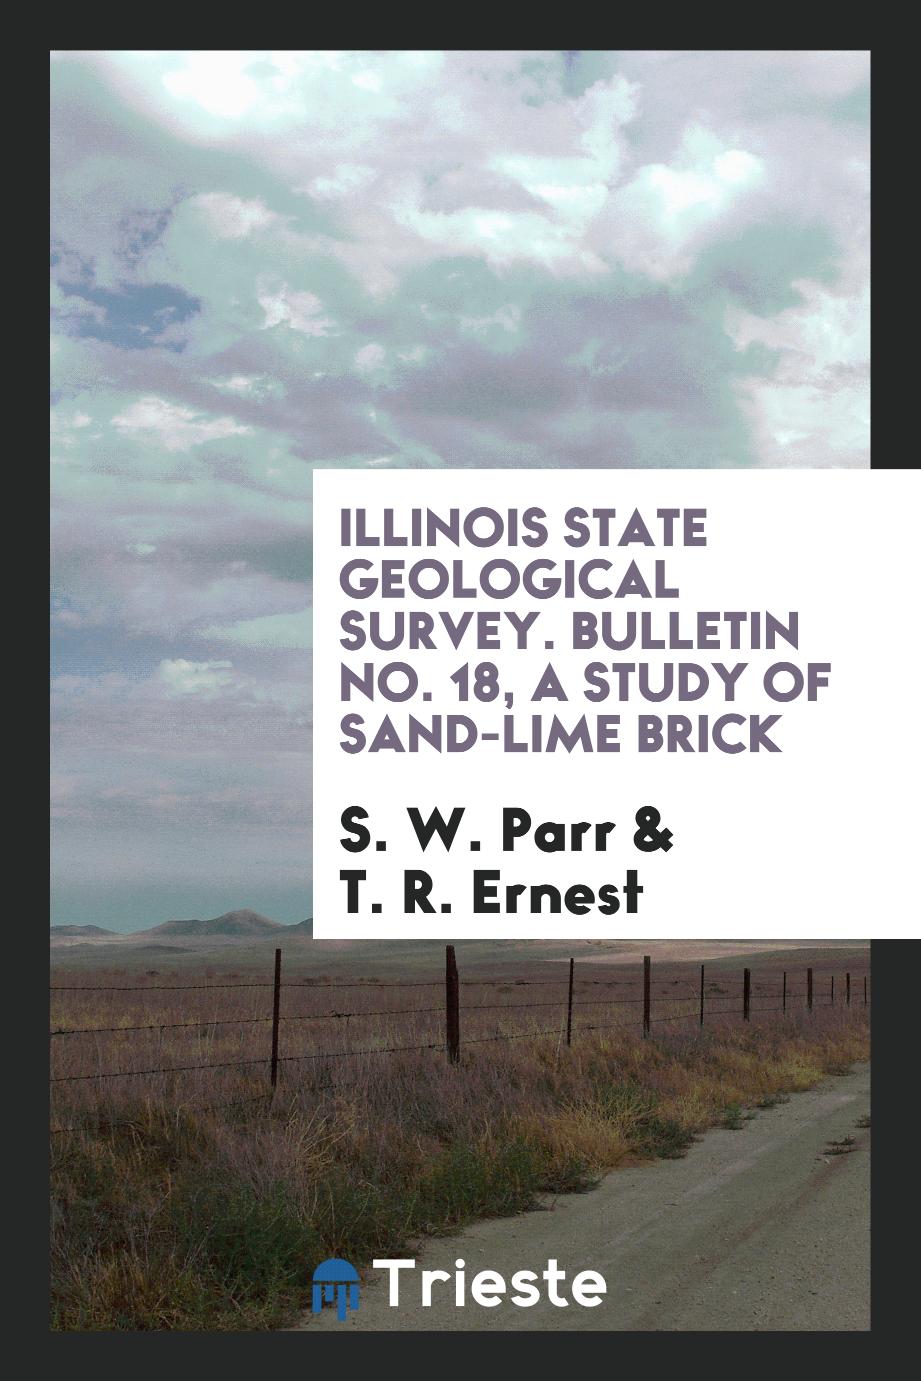 Illinois State Geological Survey. Bulletin No. 18, A Study of Sand-Lime Brick